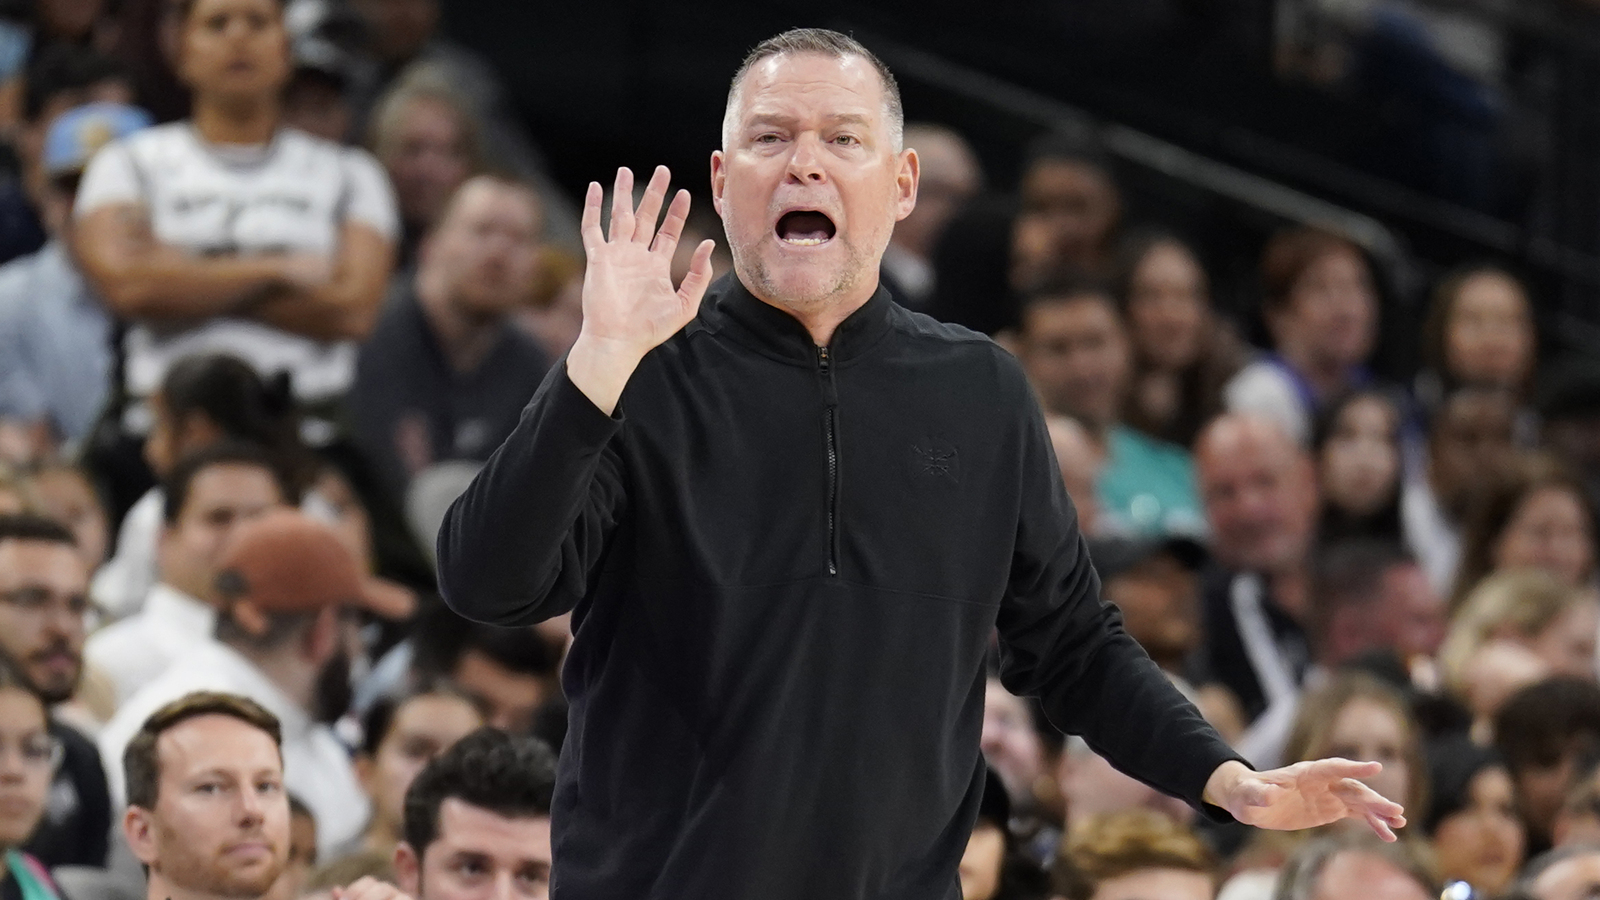 NBA insider suggests Denver Nuggets coach Michael Malone could be on the hot seat